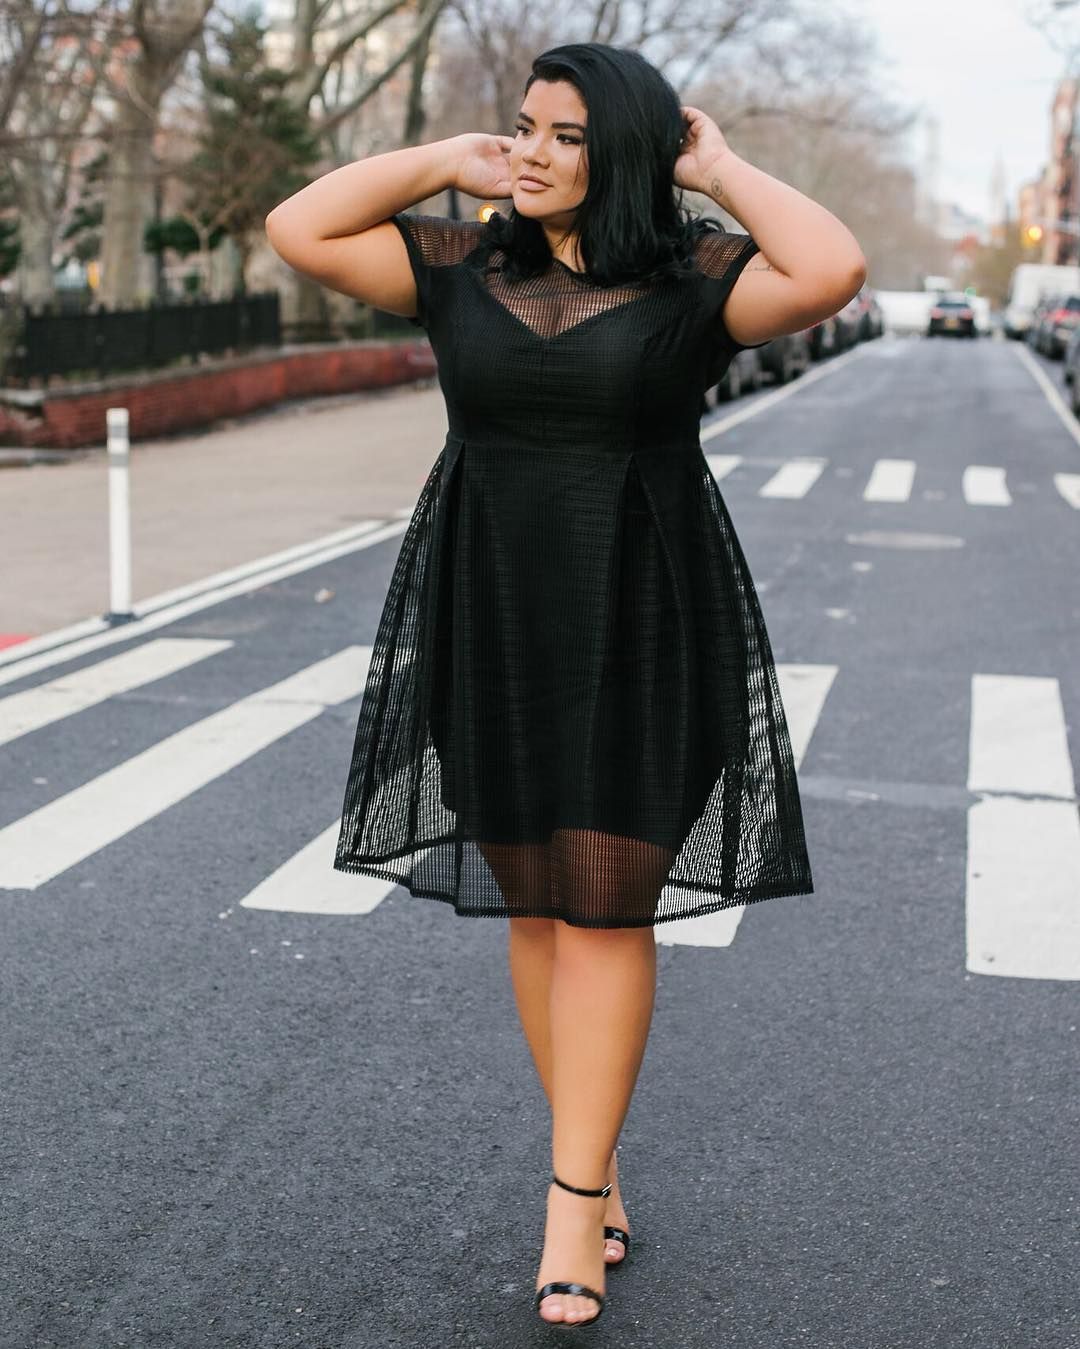 Stylish Outfit Ideas for Plus-Size Women